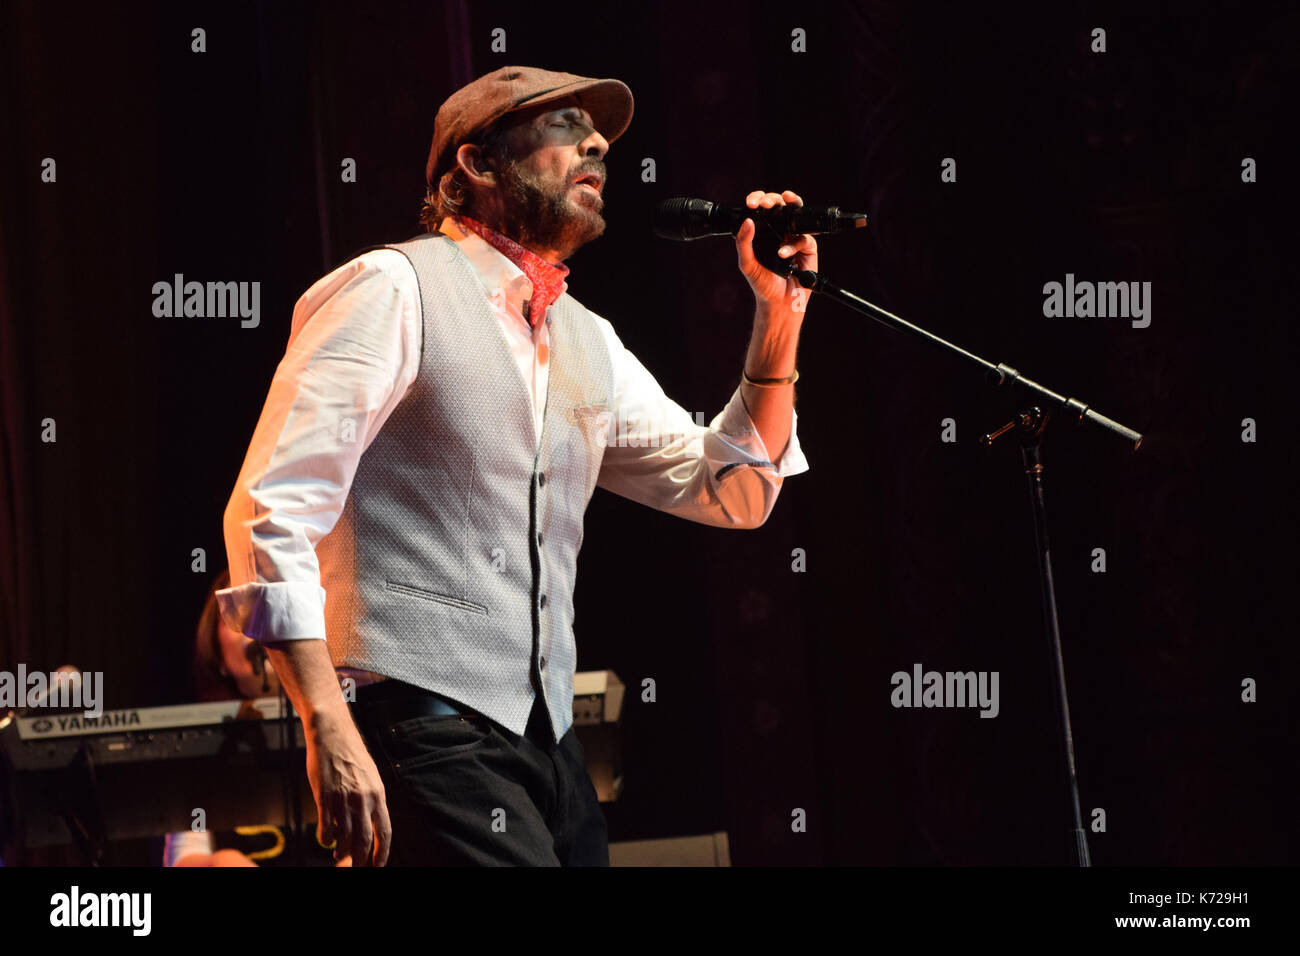 New York, USA. 14th Sep, 2017. Juan Luis Guerra performs at The United Palace Theatre in New York City during his Todo Tiene Su Hora Tour on September 14, 2017. Credit: Edwin Garcia/MediaPunch/Alamy Live News Stock Photo